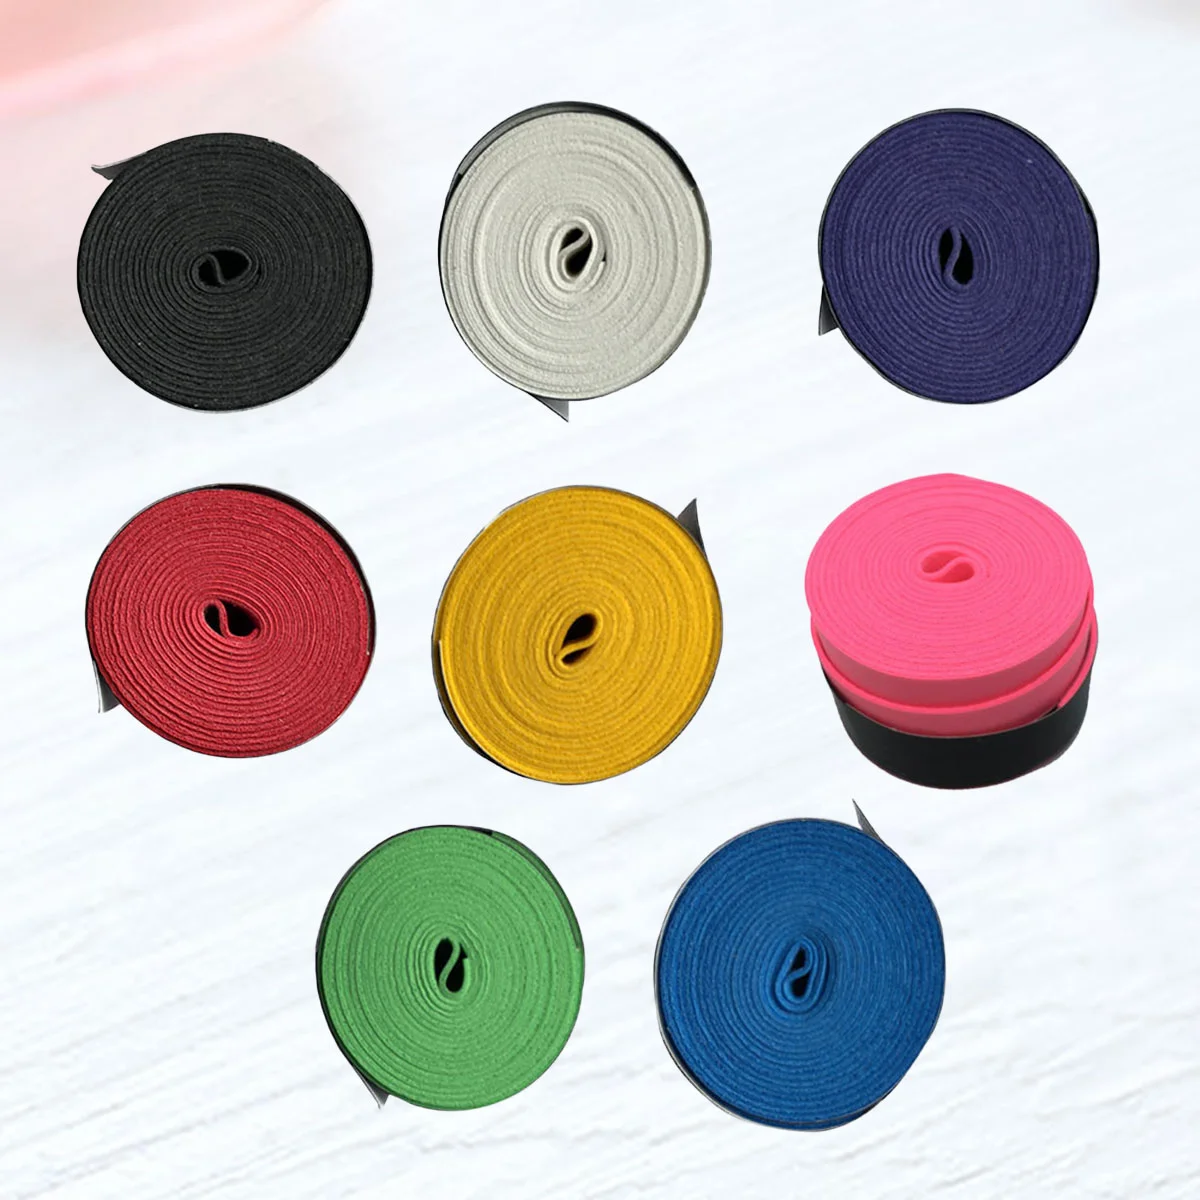 8PCS Durable Anti-Slip Racket Wrapping Bands Tennis Grip Tape for Fishing Pole 